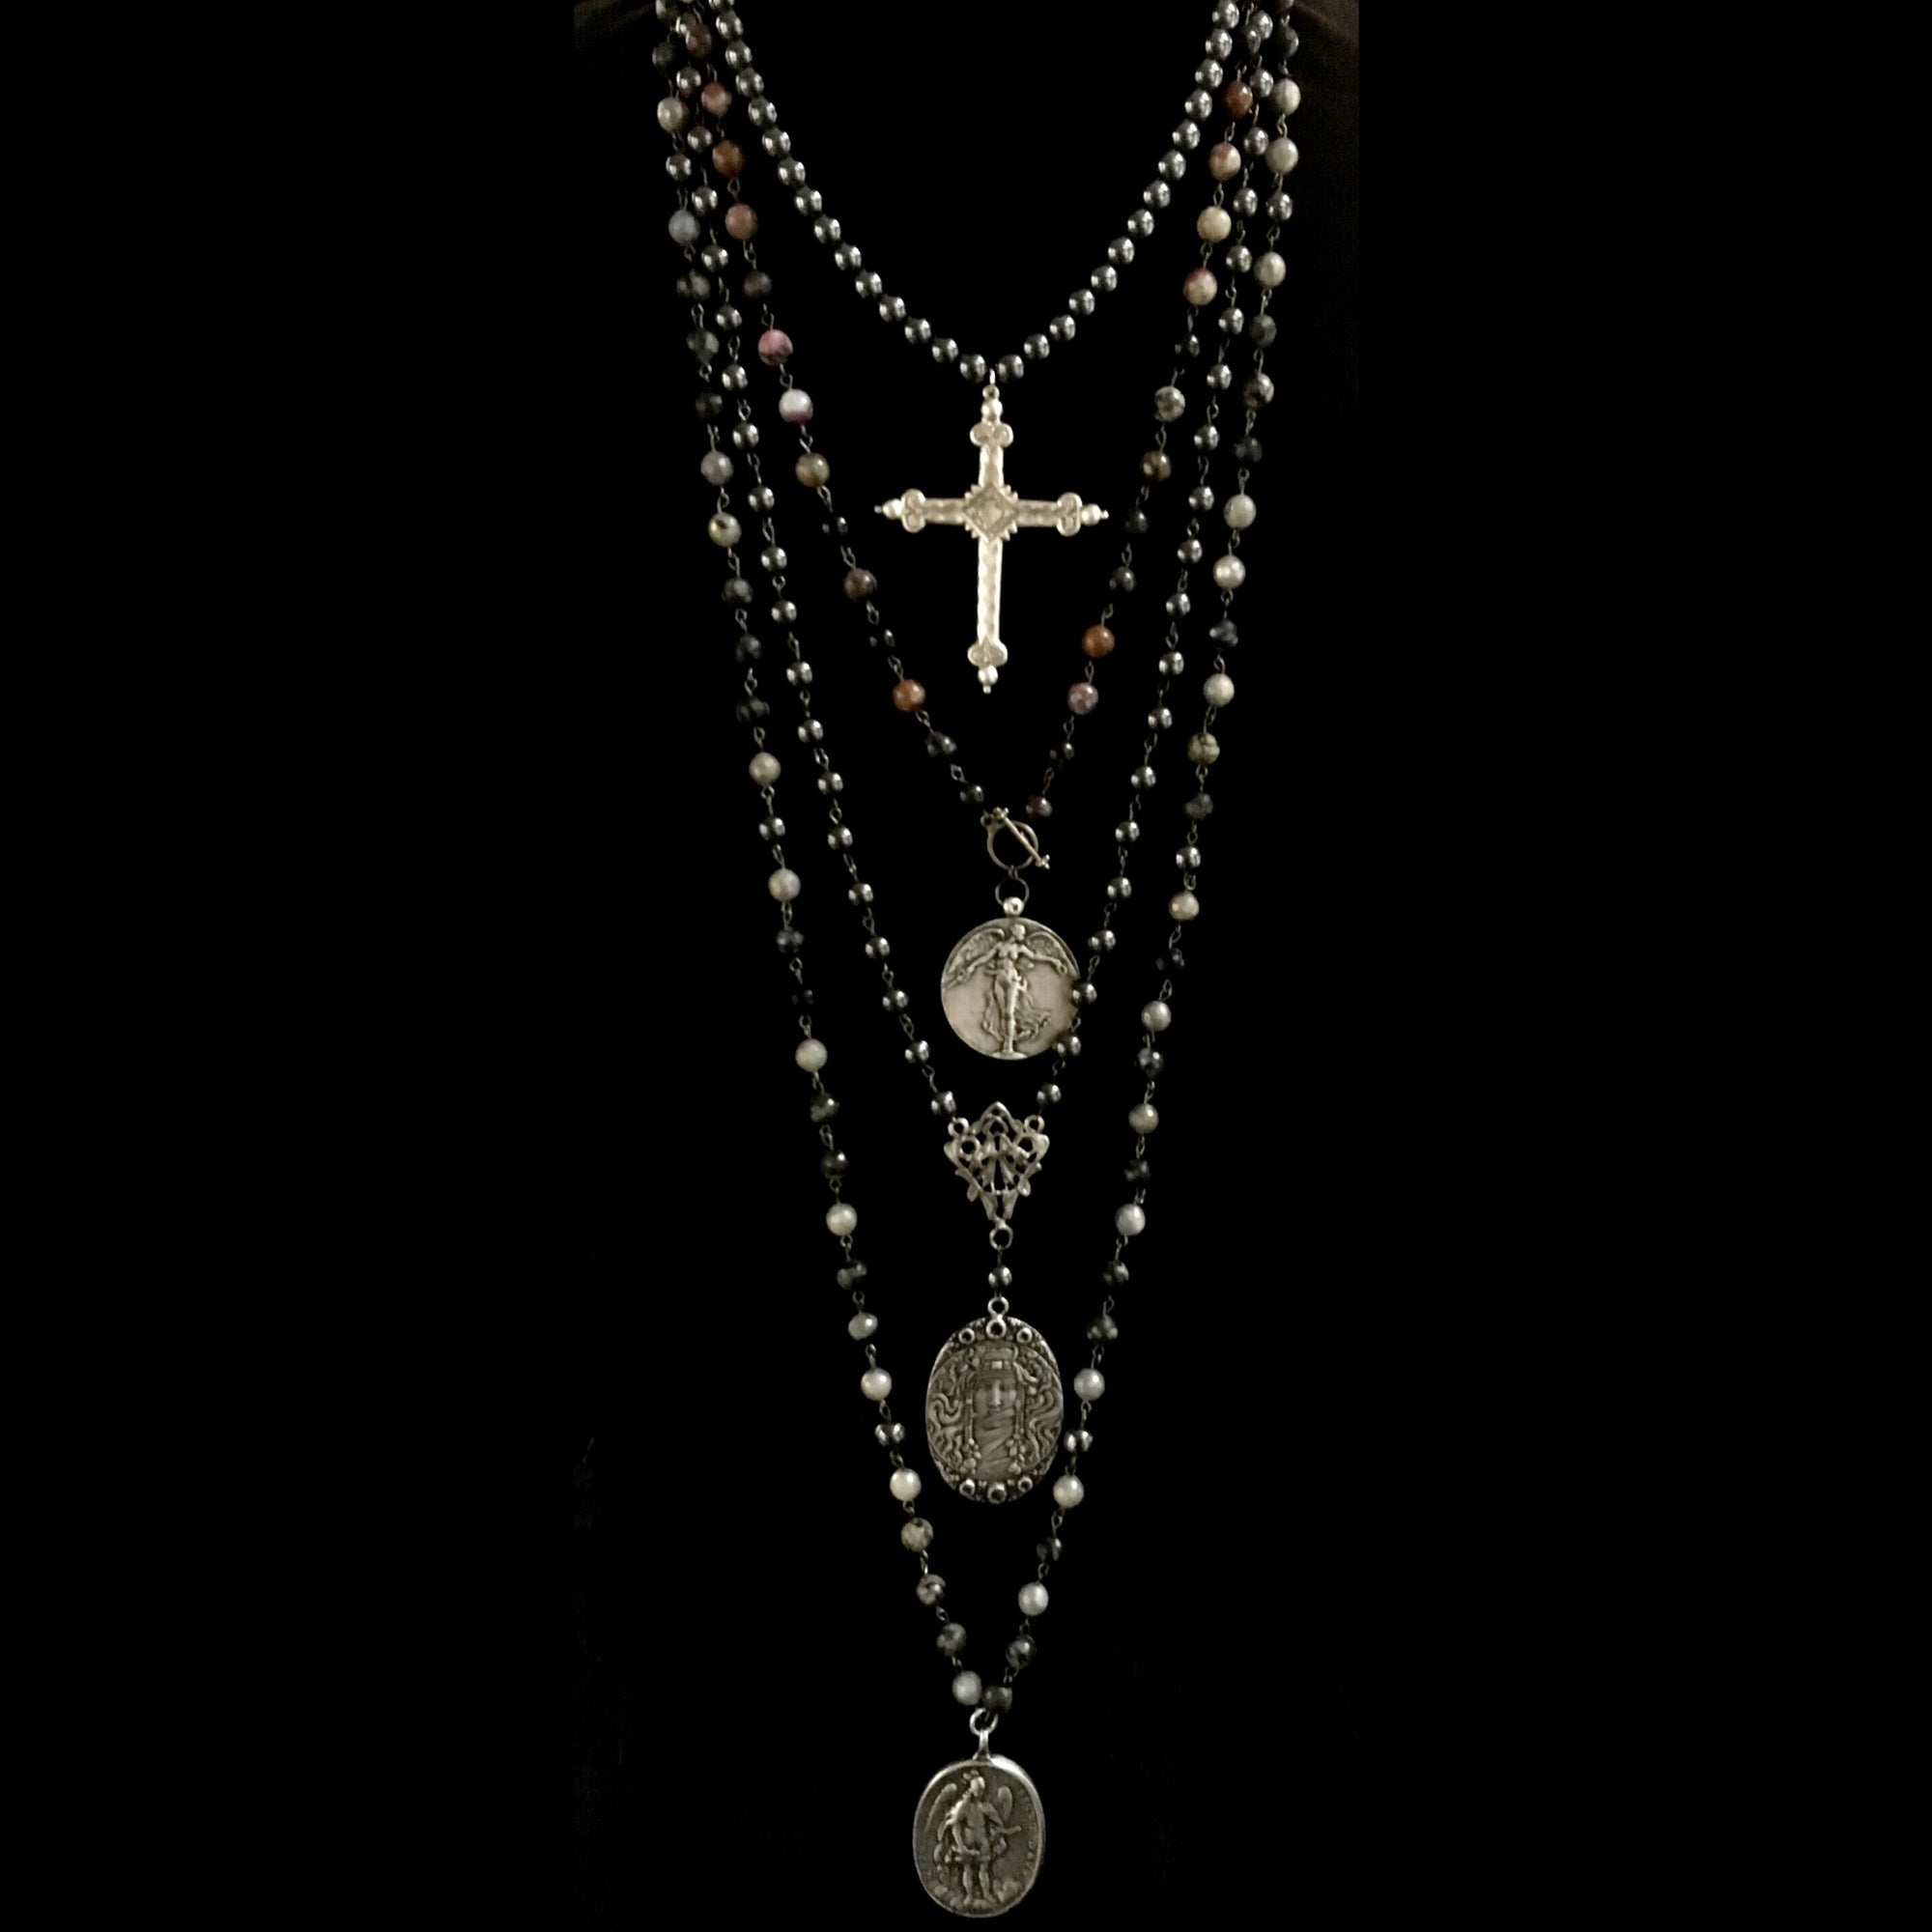 Hematite Silver Sacred Heart Cross Necklace by Whispering Goddess